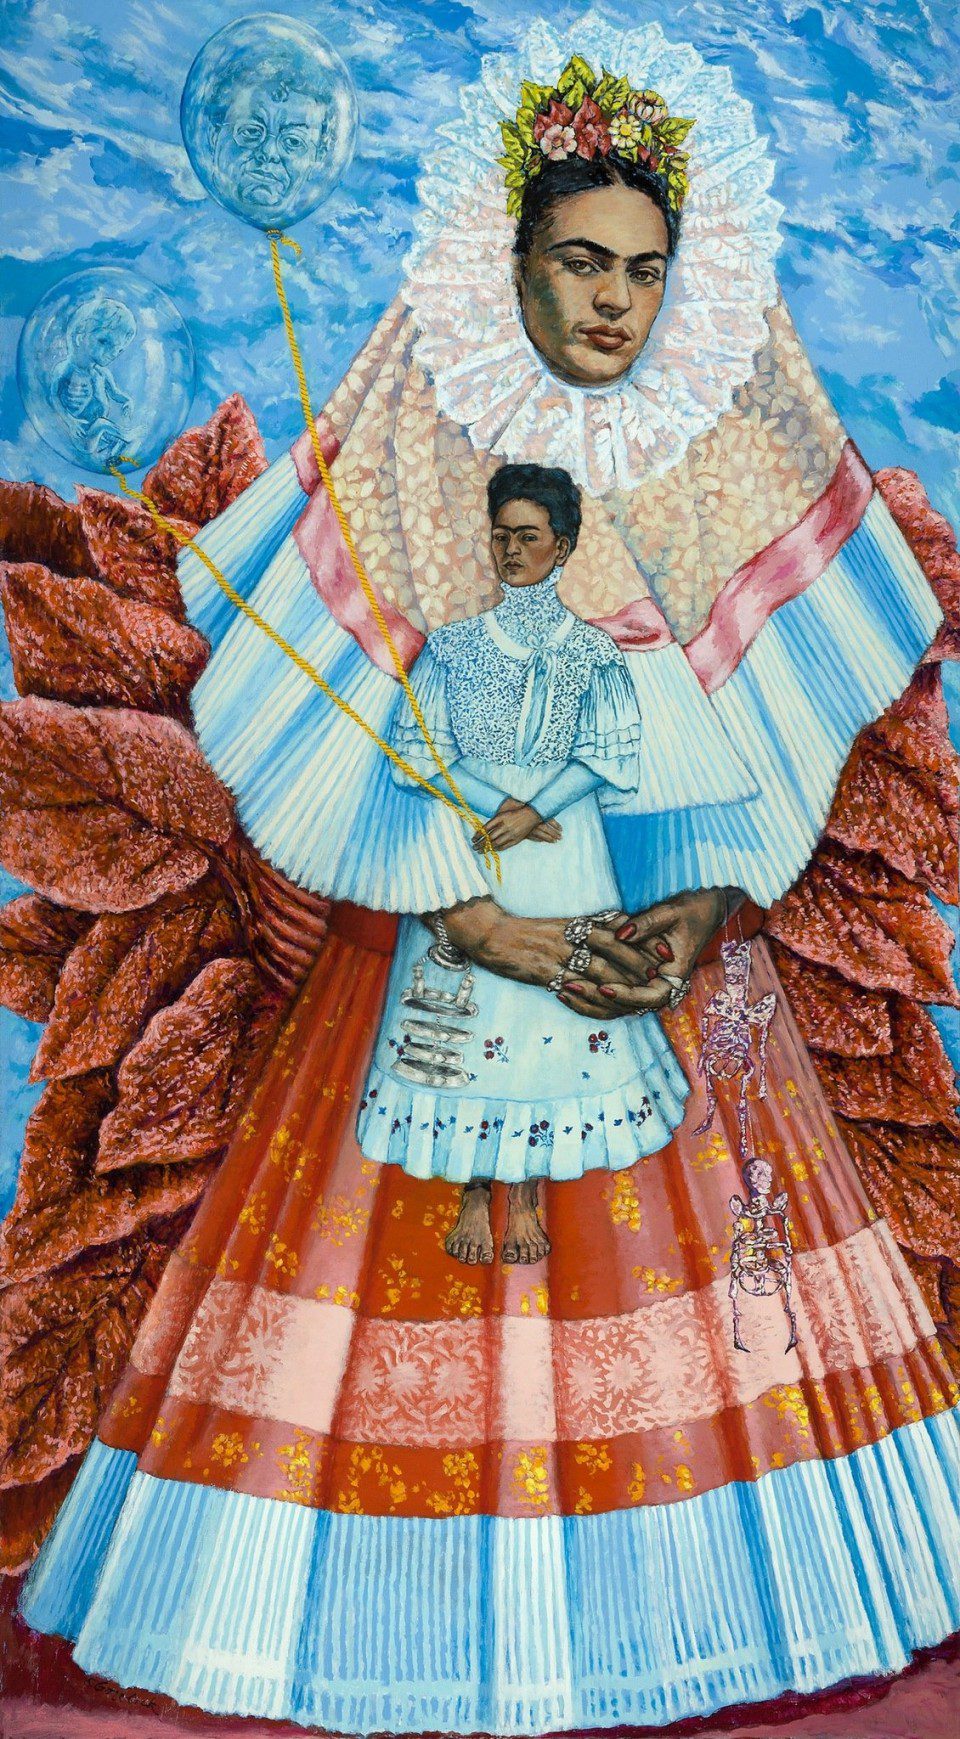 Shirley Gorelick: Frida Kahlo, 1976 Acrylic on canvas108 x 60 in. Rowan University Art Gallery, Gift of Jamie S. Gorelick(c) Shirley Gorelick Foundation (Photo: Karen Mauch Photography)